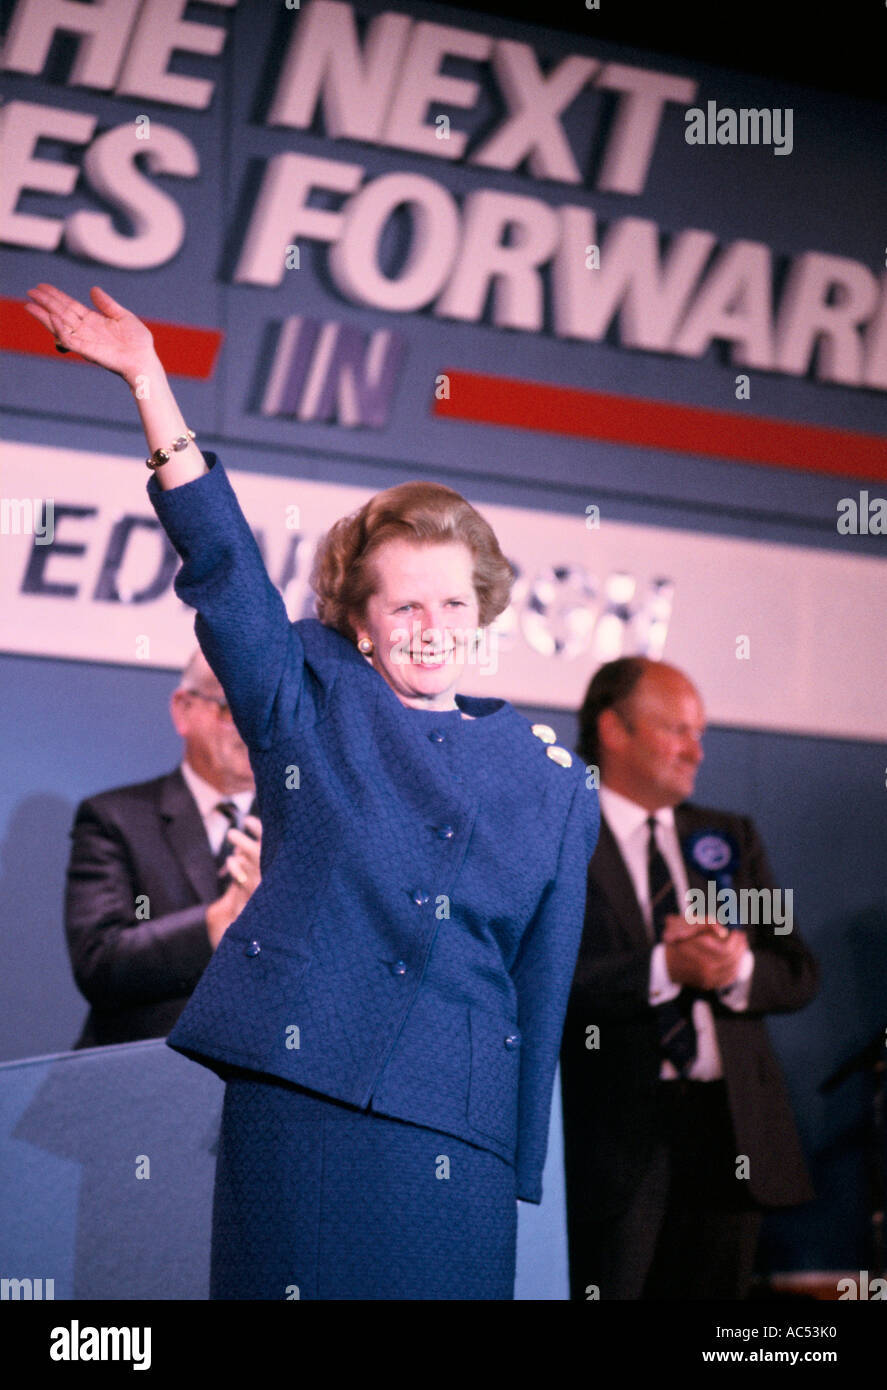 THATCHER WAVING AT CONFERENCE  Stock Photo